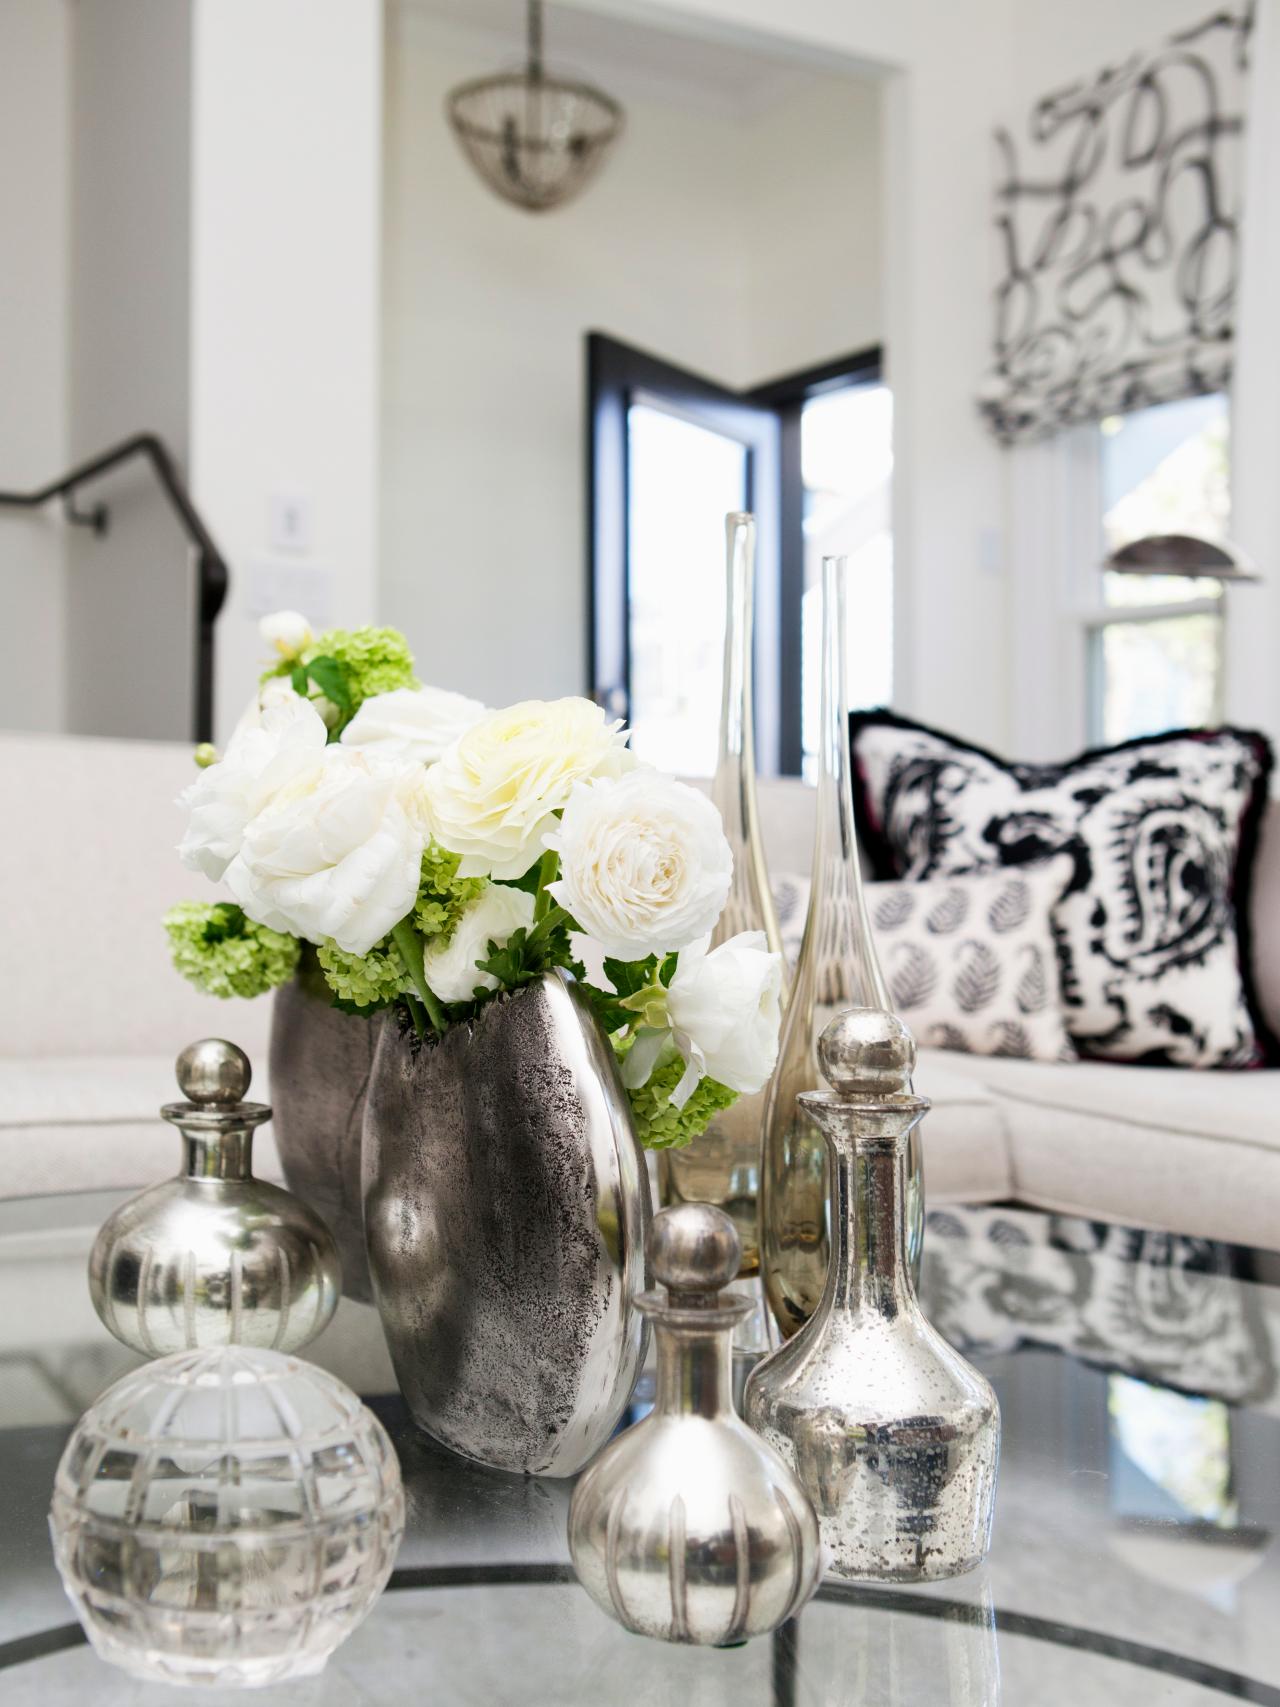 White Living Room With Black and Silver Accents | HGTV